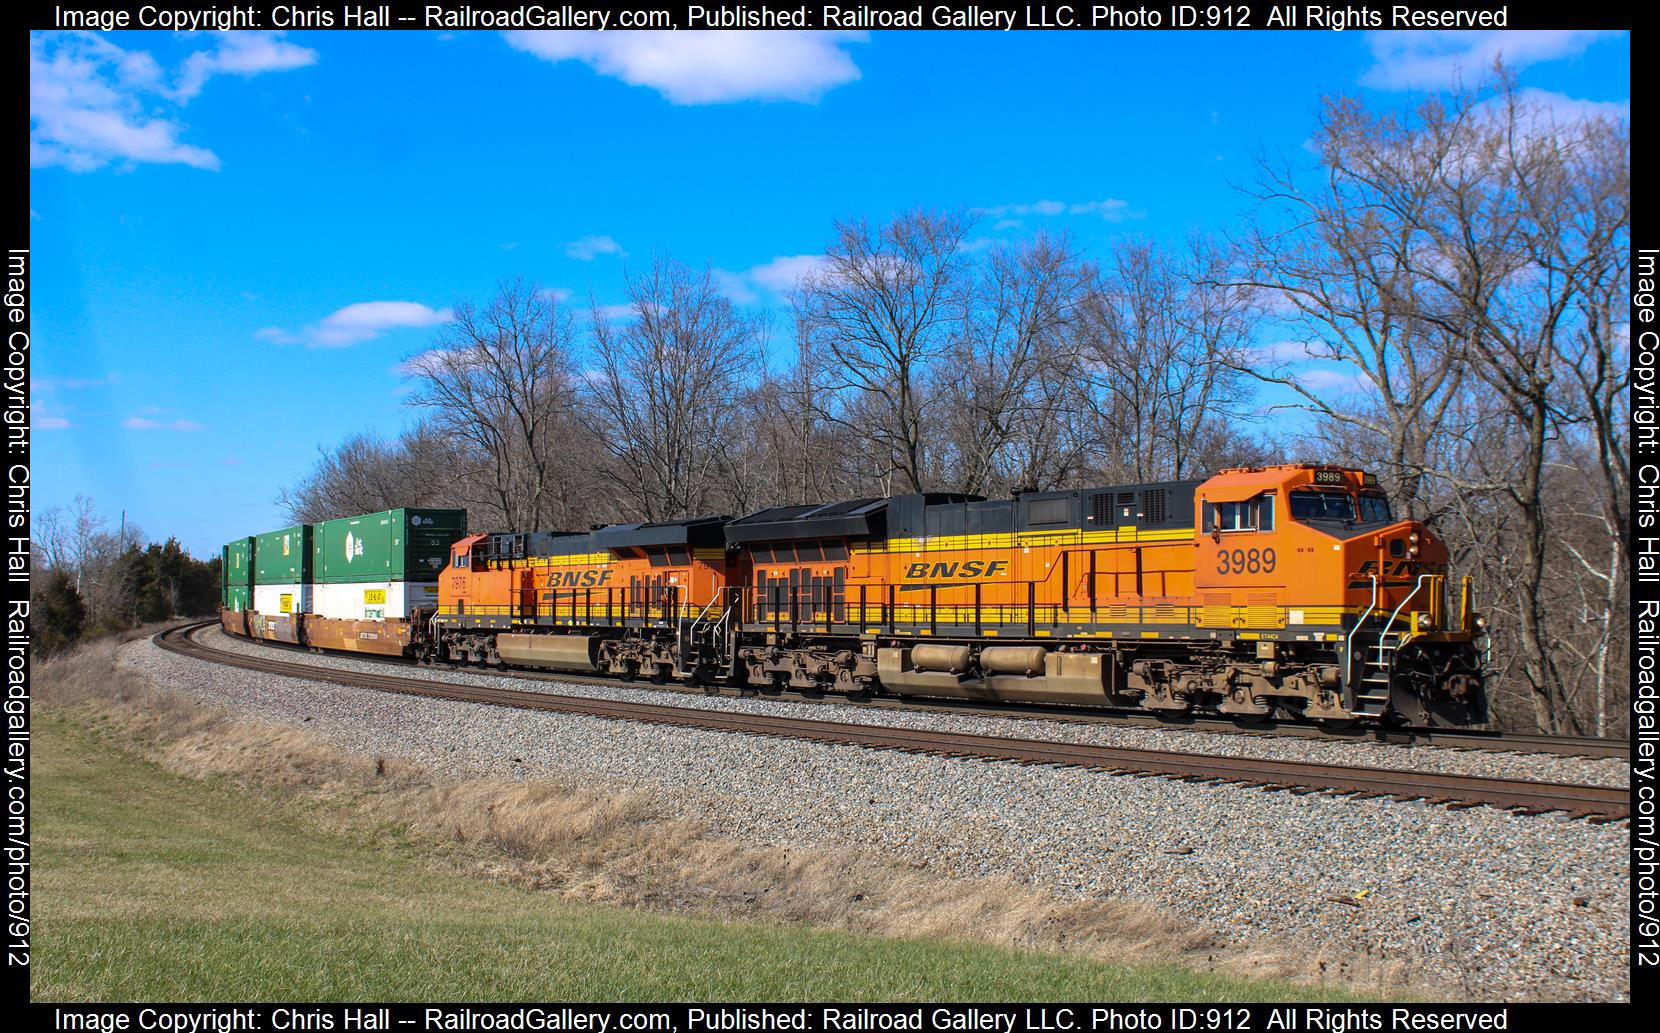 BNSF 3989 is a class GE ET44C4 and  is pictured in Waddy, Kentucky, United States.  This was taken along the Louisville District on the Norfolk Southern. Photo Copyright: Chris Hall uploaded to Railroad Gallery on 04/02/2023. This photograph of BNSF 3989 was taken on Sunday, March 19, 2023. All Rights Reserved. 